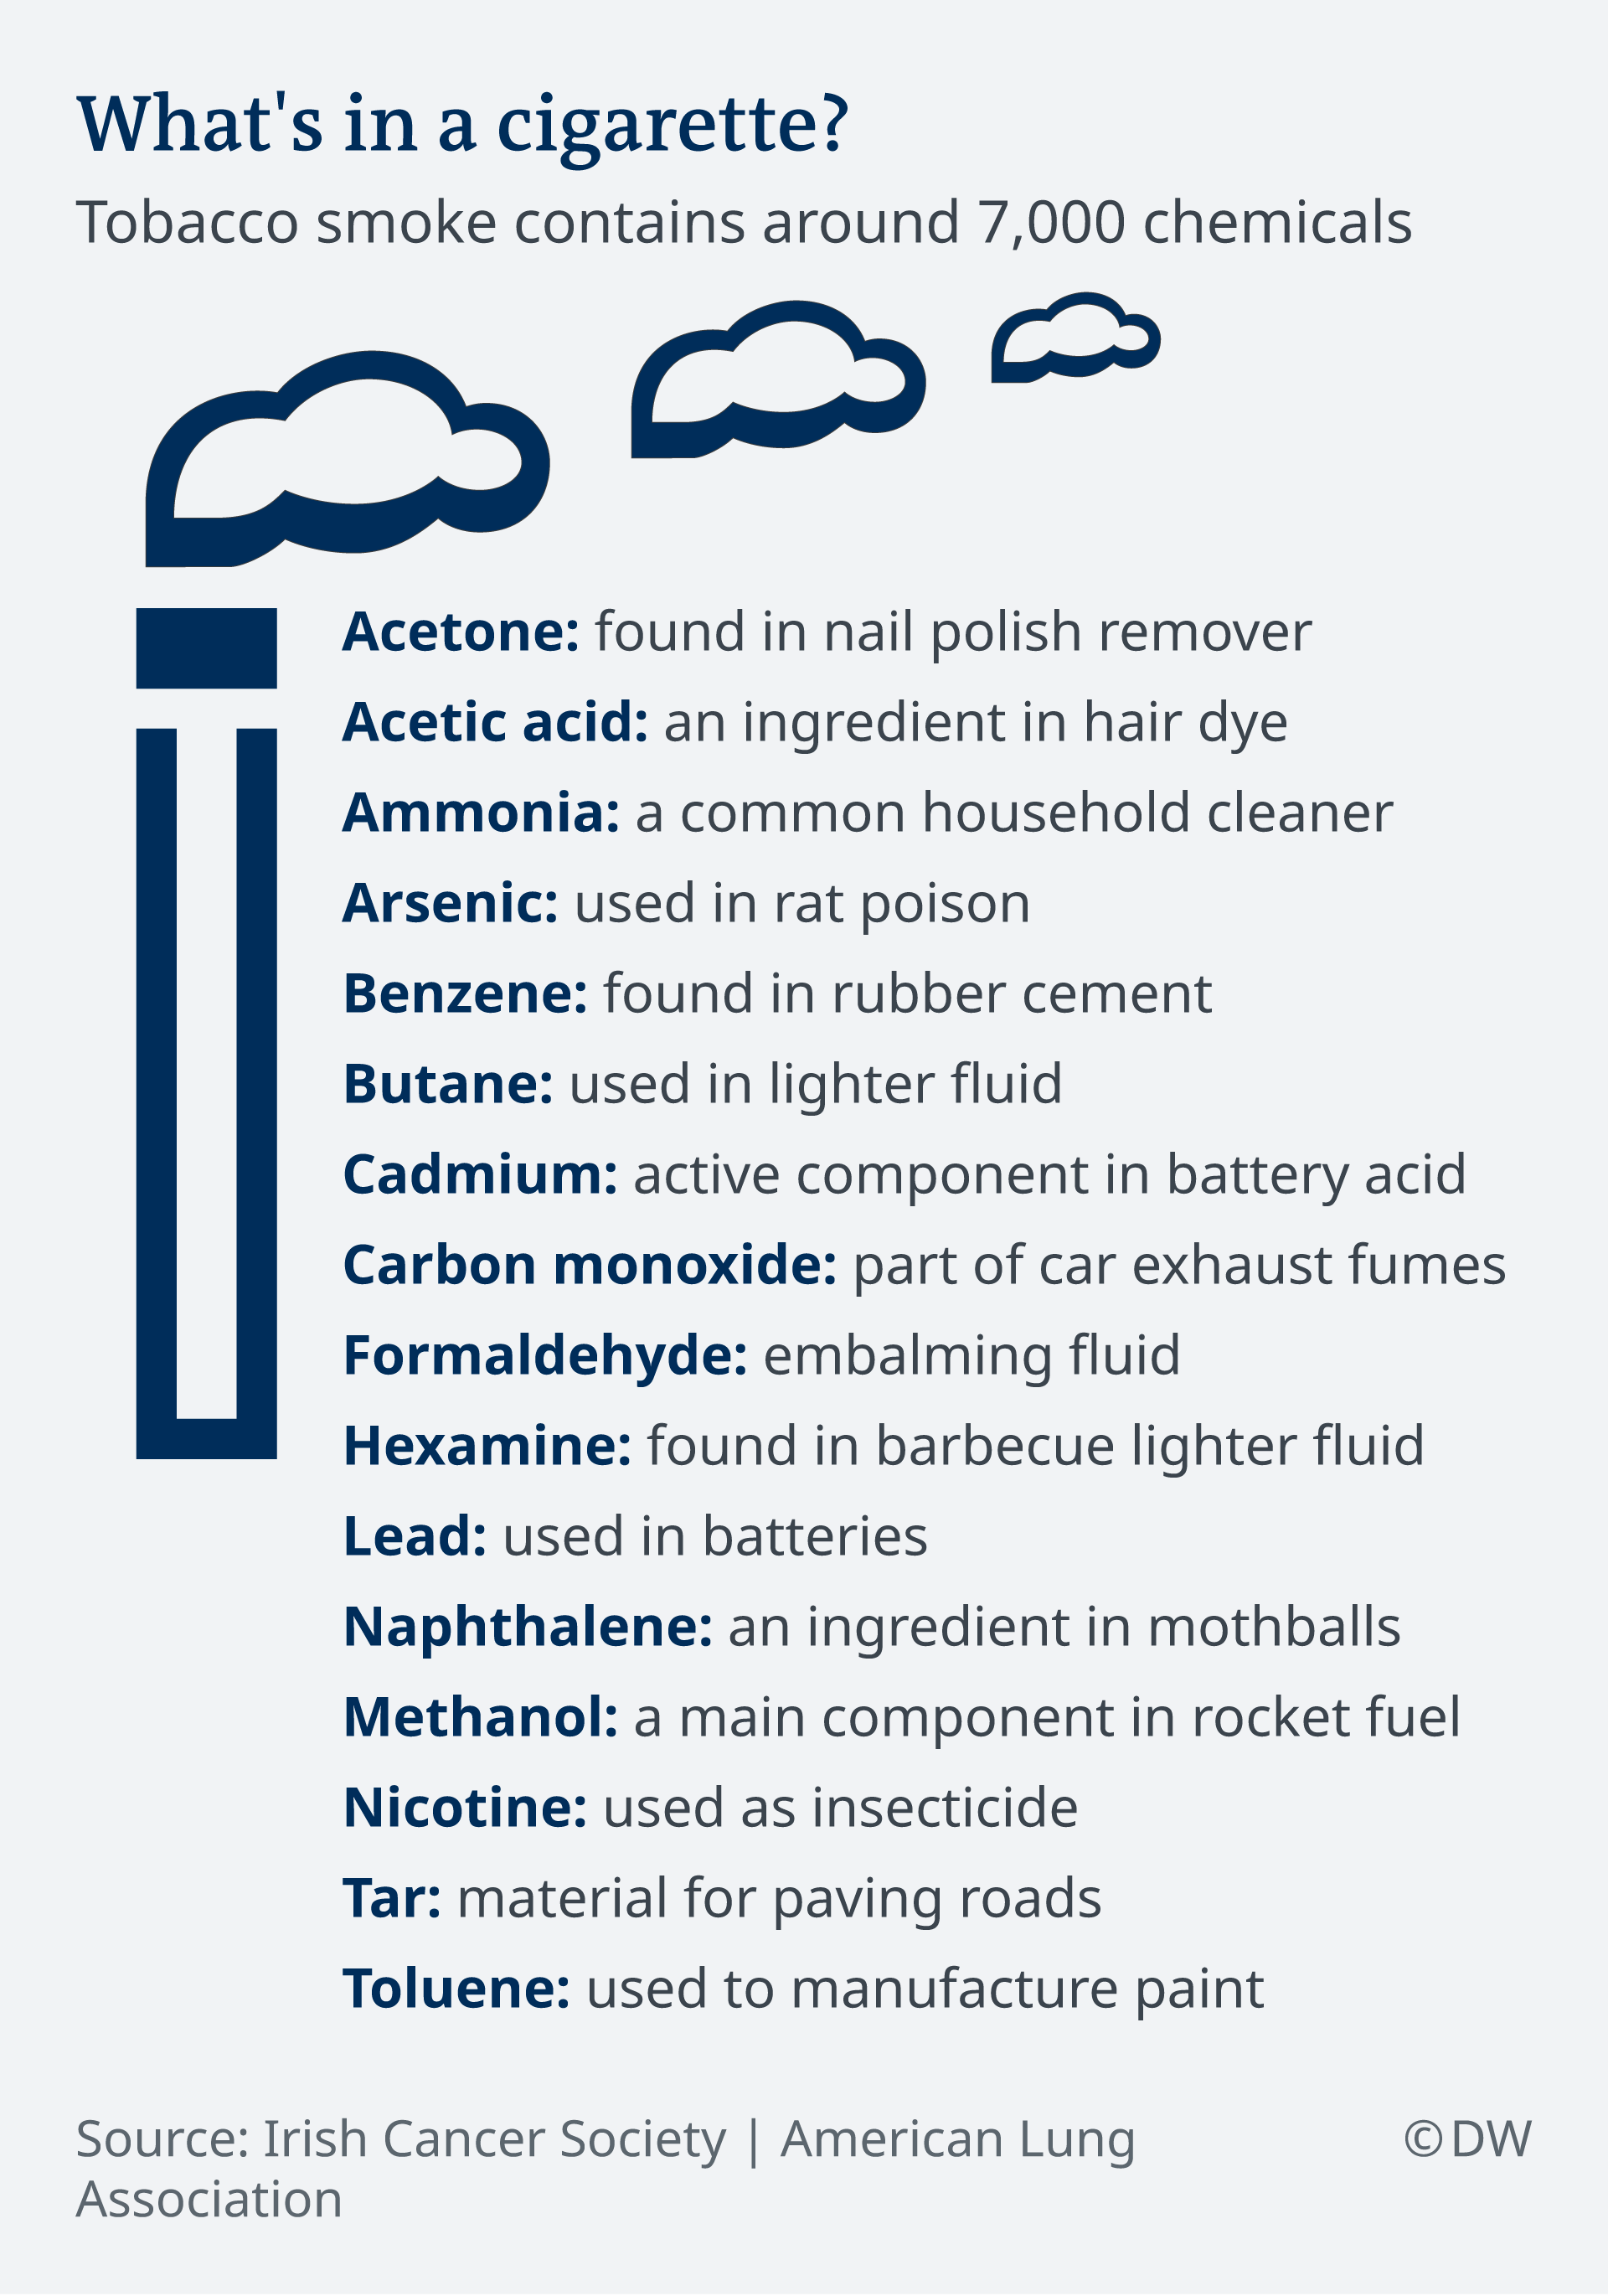 Infographic showing the composition of cigarettes, including nail polish remover acetone